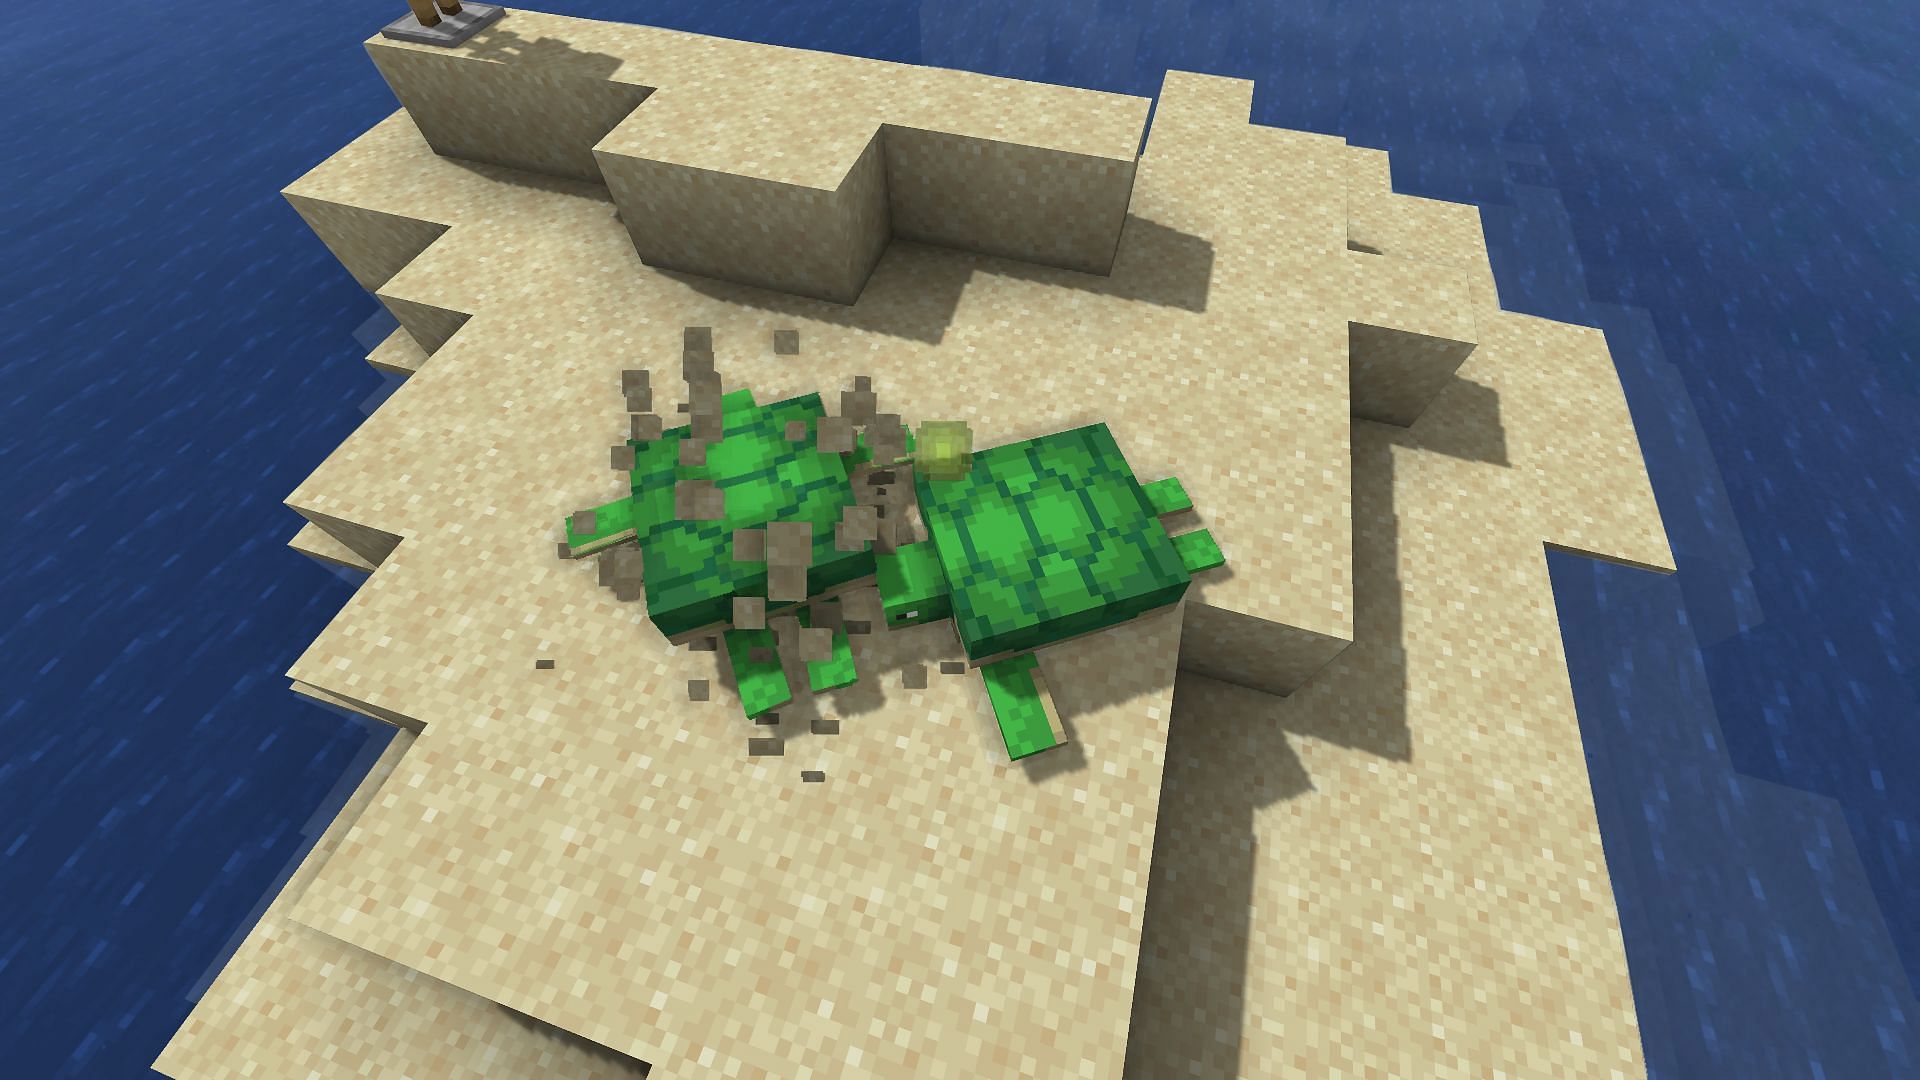 Turtles just after mating (Image via Minecraft)